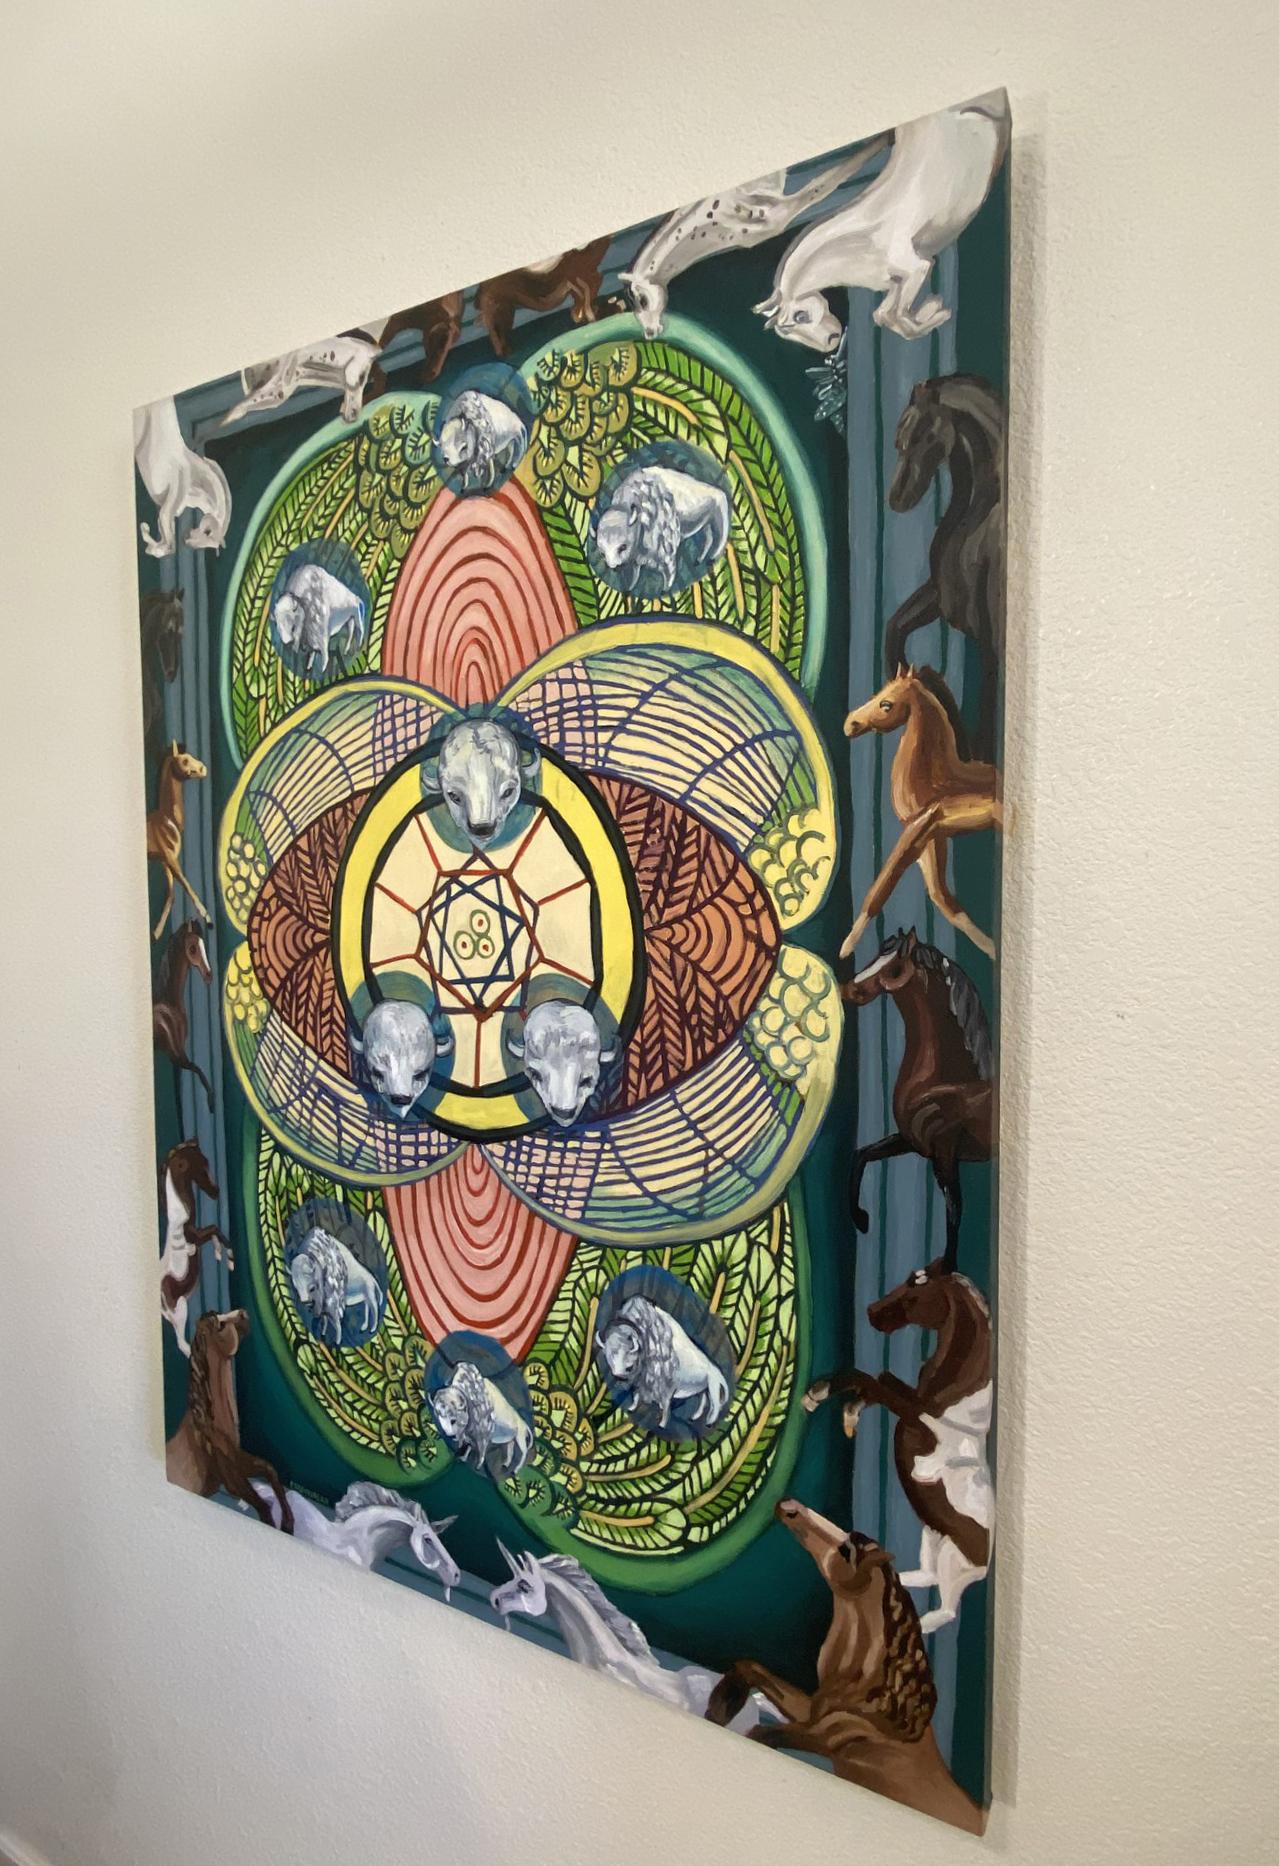 <p>Artist Comments<br />The artwork depicts the Nine of Pentacles card, symbolizing rapidly growing success, incoming financial satisfaction, and wealth. White bison figures represent coins or monetary units, conveying a mythical message that